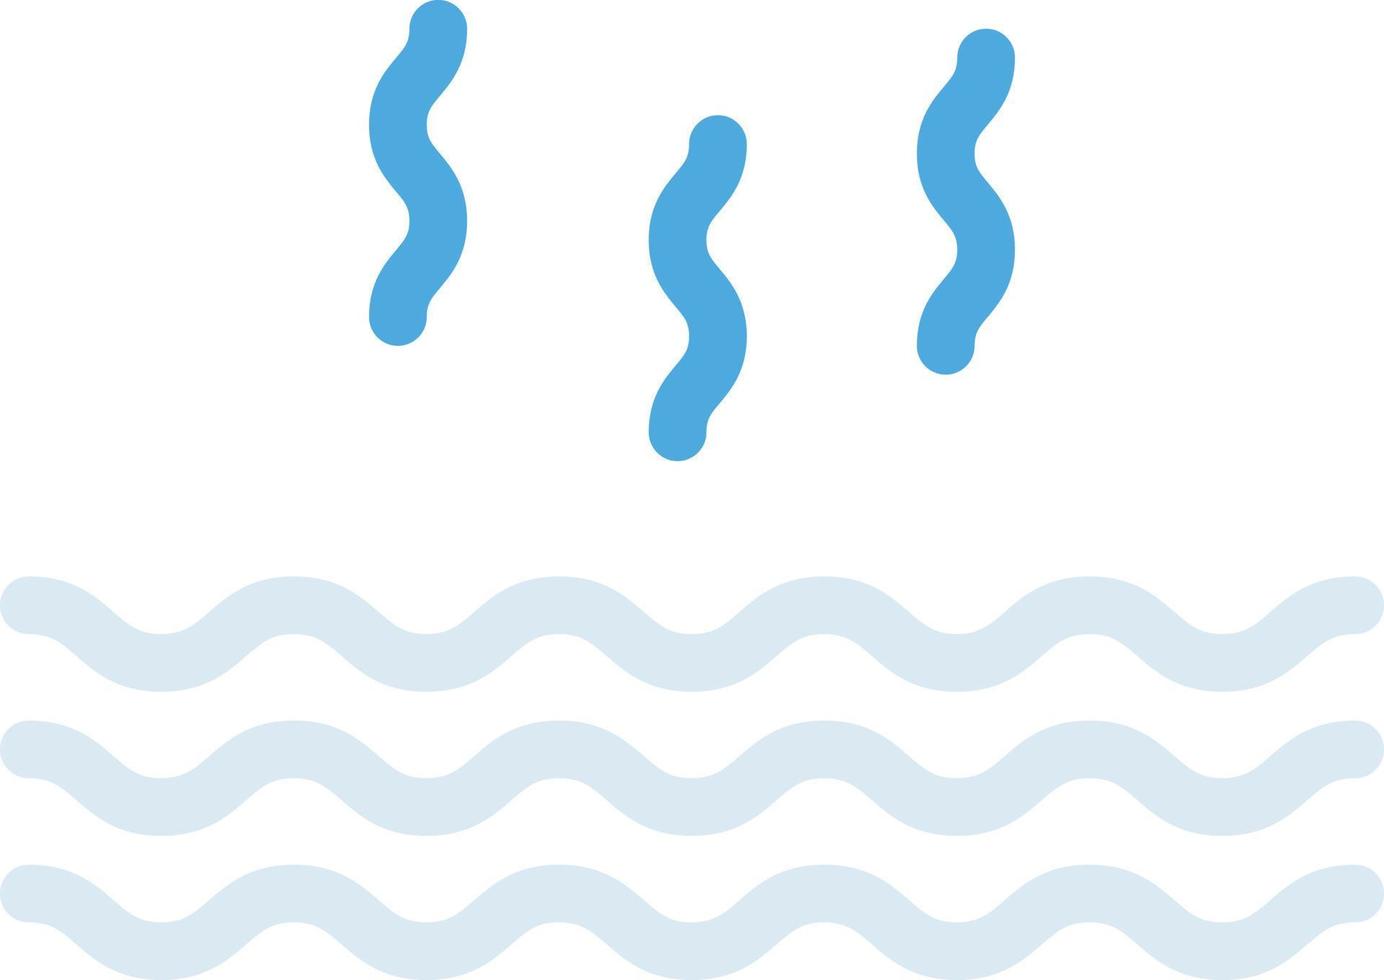 water vector illustration on a background.Premium quality symbols.vector icons for concept and graphic design.